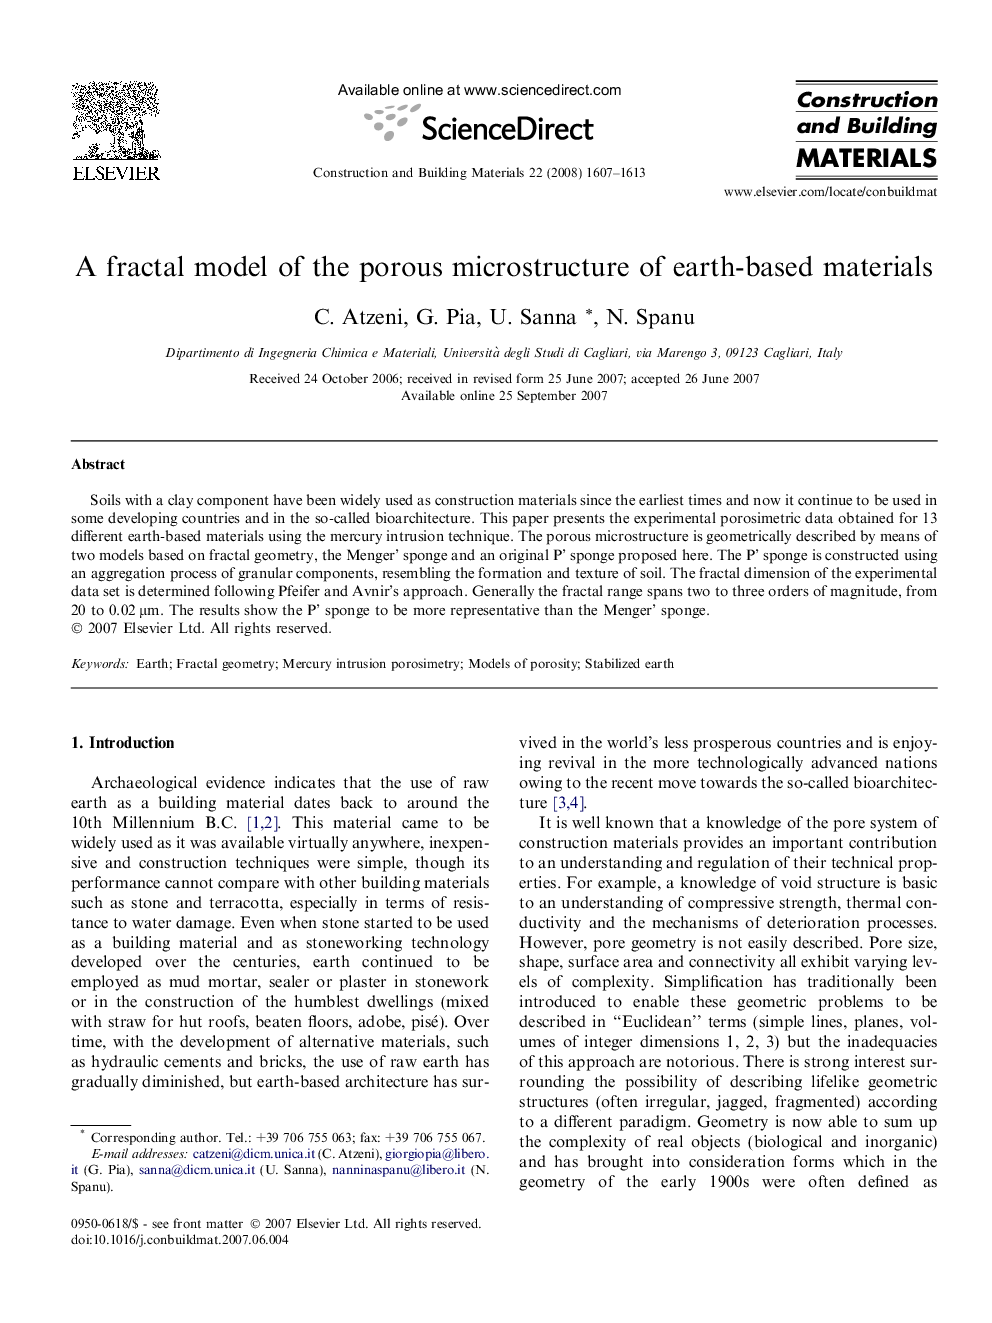 A fractal model of the porous microstructure of earth-based materials